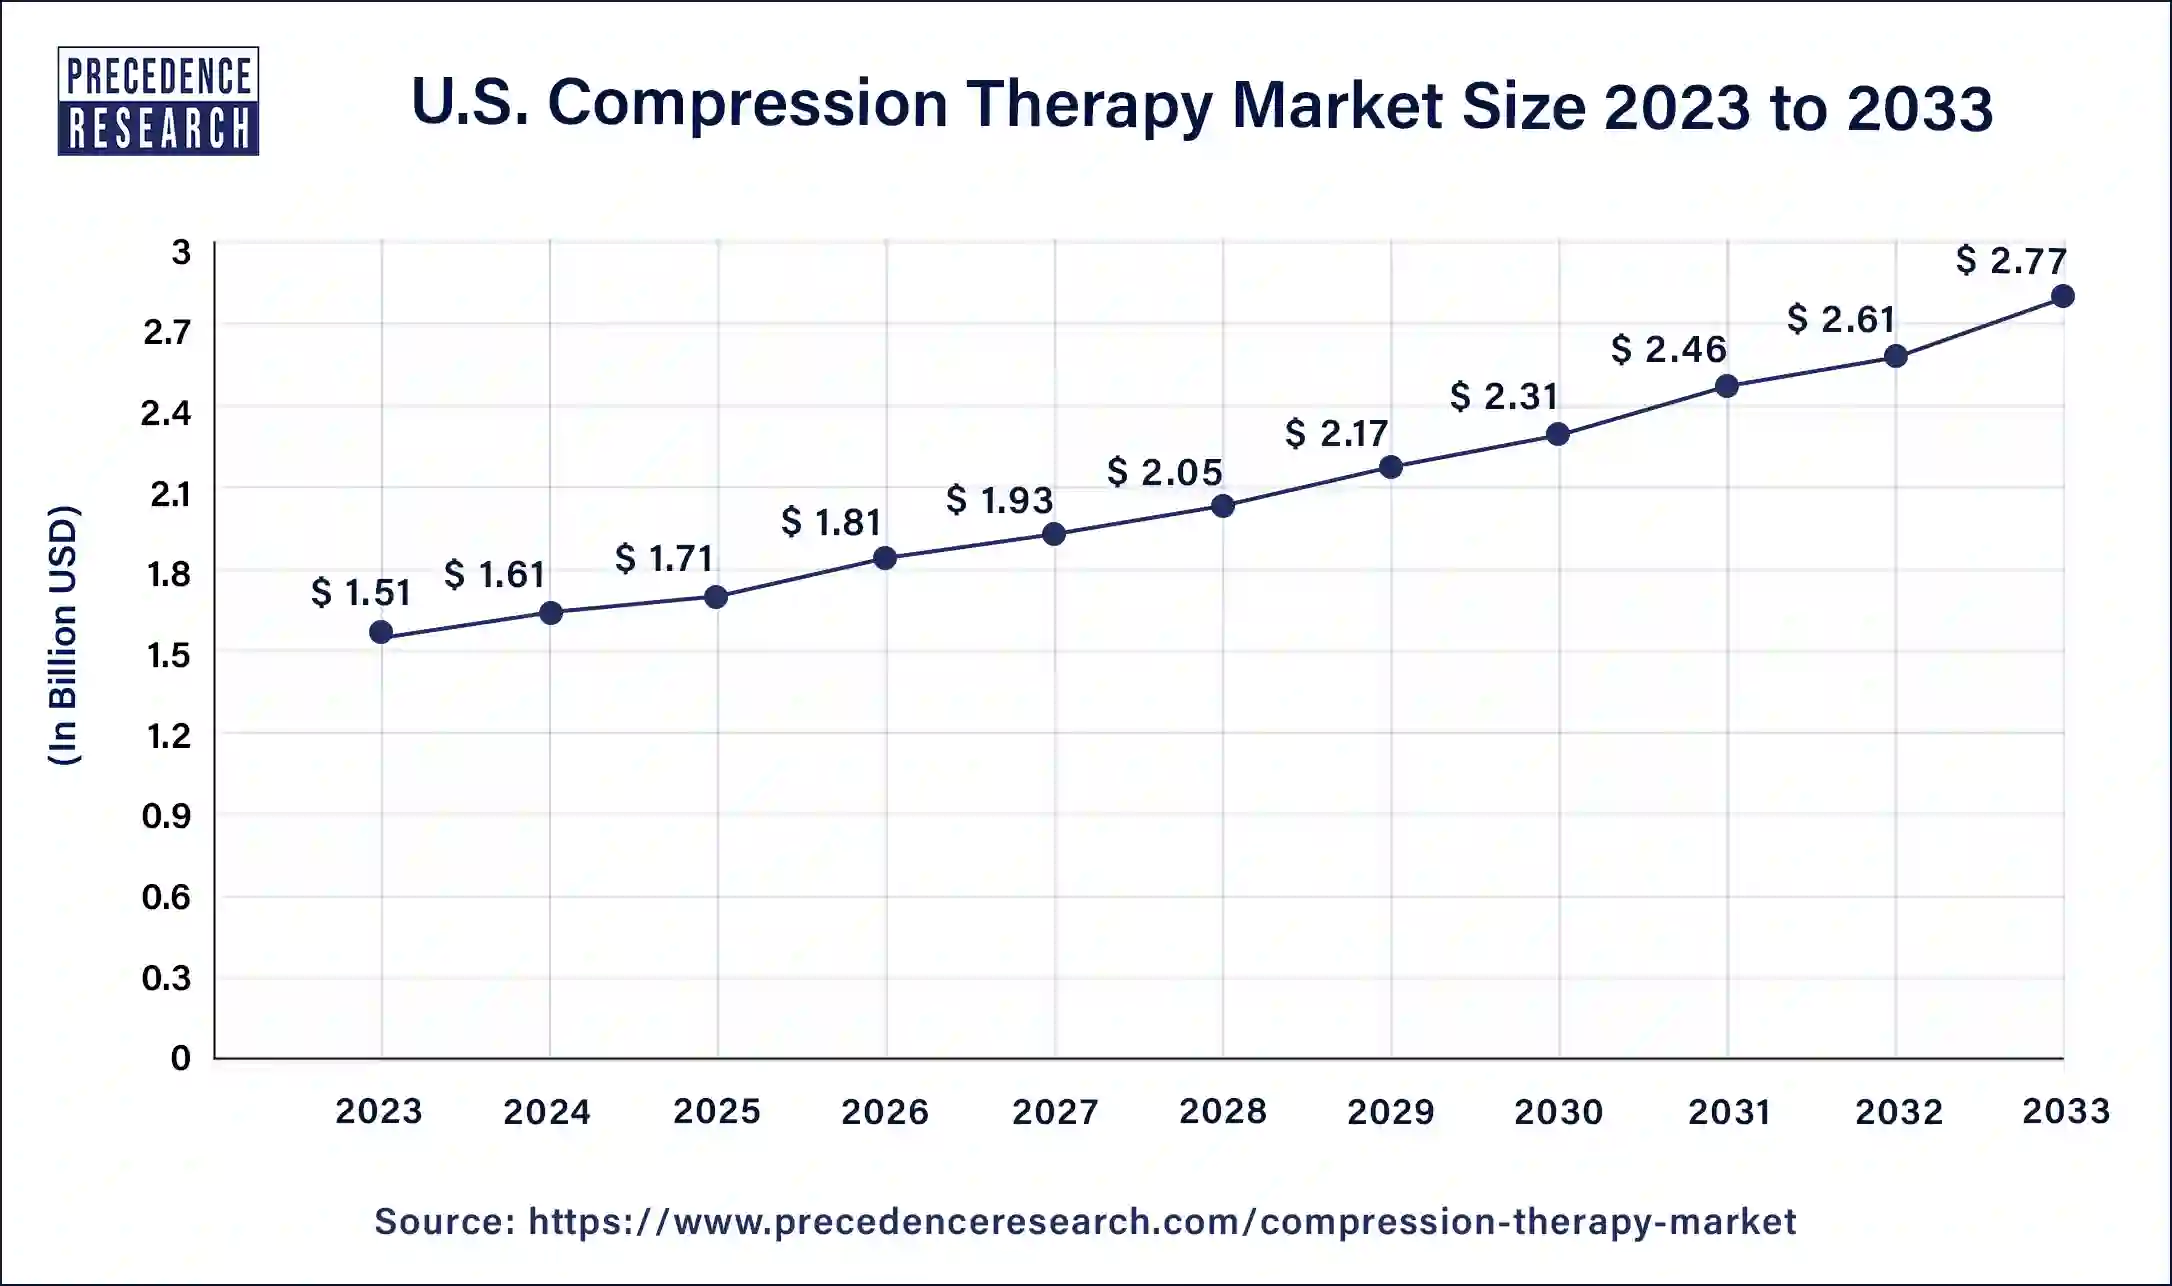 U.S. Compression Therapy Market Size 2024 to 2033